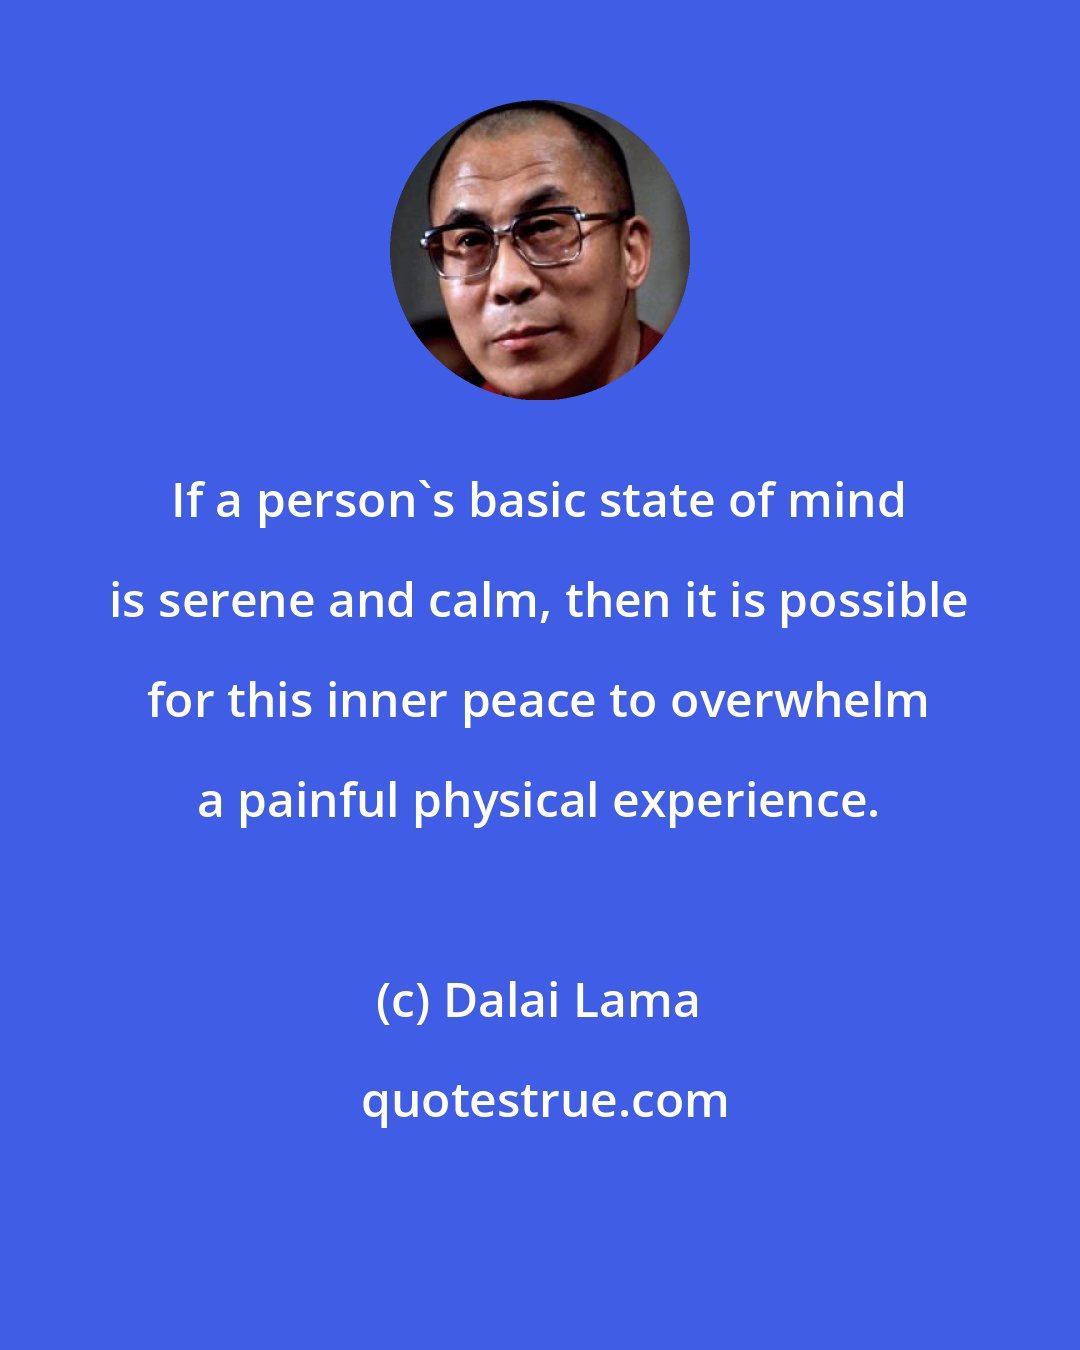 Dalai Lama: If a person's basic state of mind is serene and calm, then it is possible for this inner peace to overwhelm a painful physical experience.